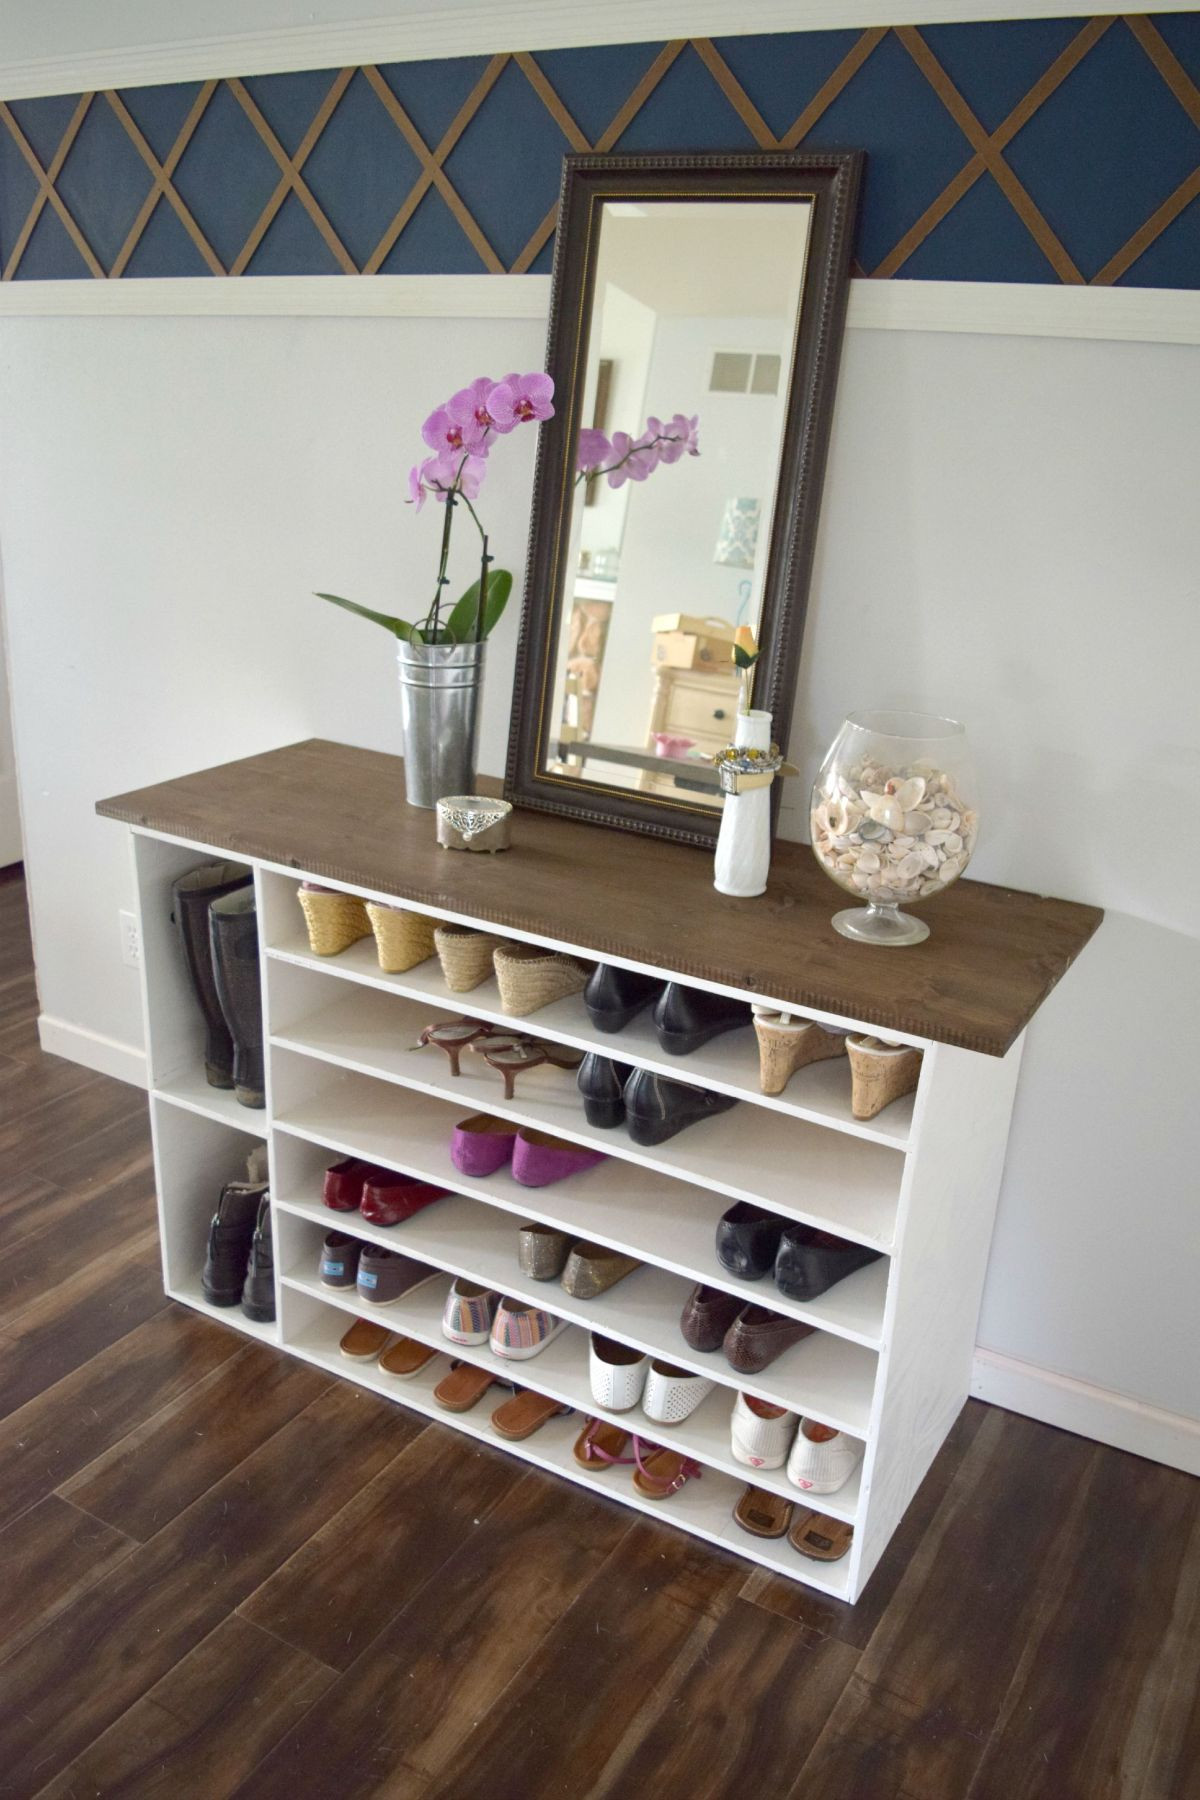 DIY Shoe Rack For Small Closet
 Stylish DIY Shoe Rack Perfect for Any Room